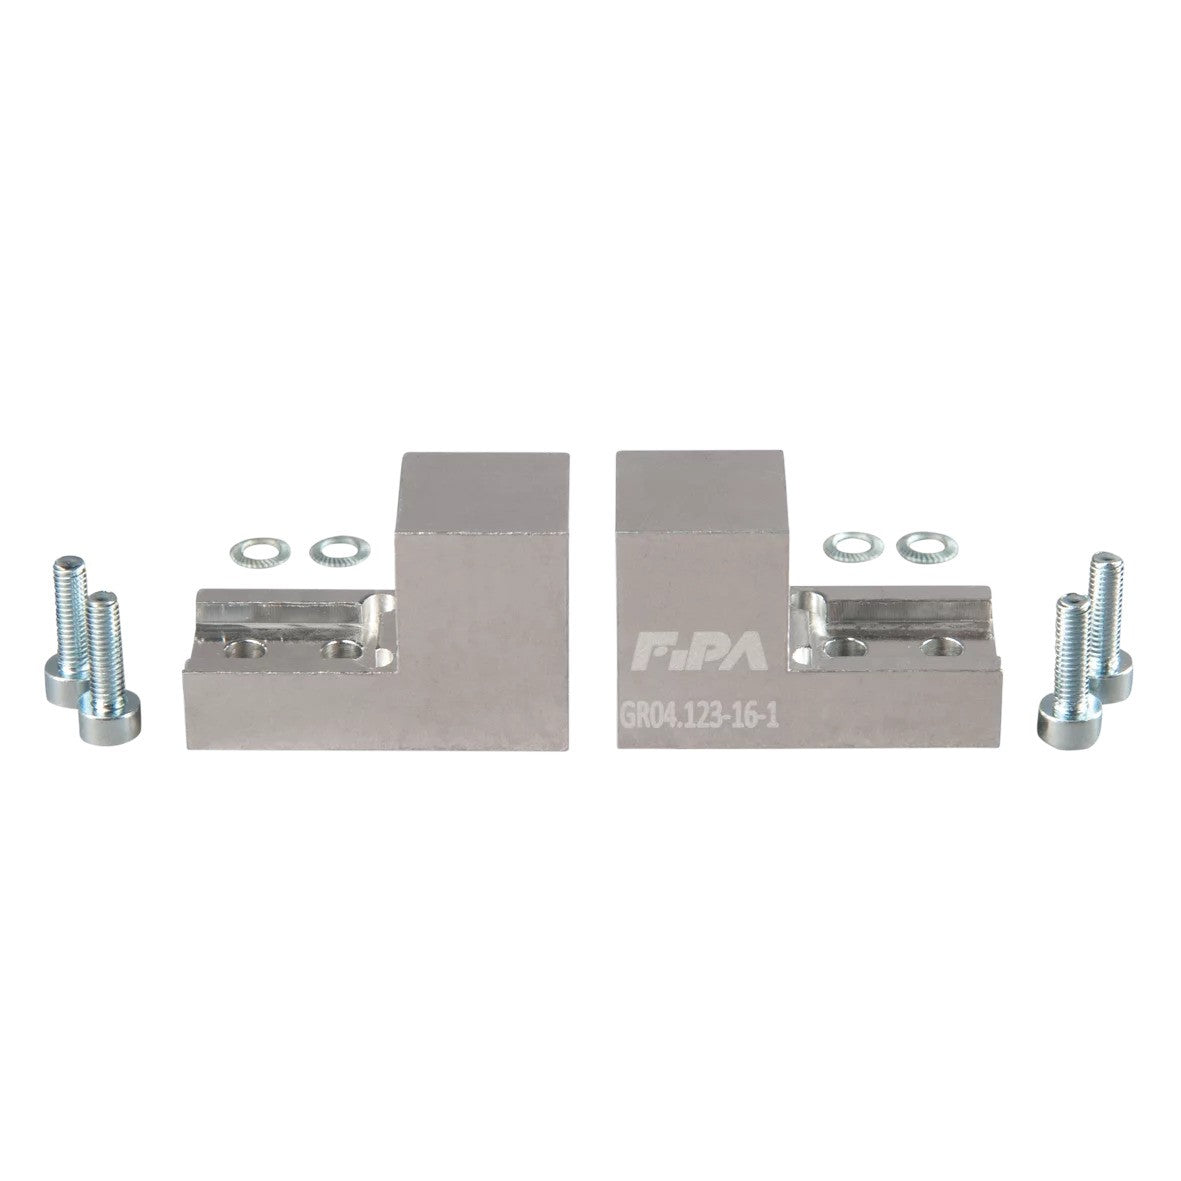 GR04.123-16-1 Base jaws for angular grippers length 31.5 mm, width 20.5 mm, aluminum